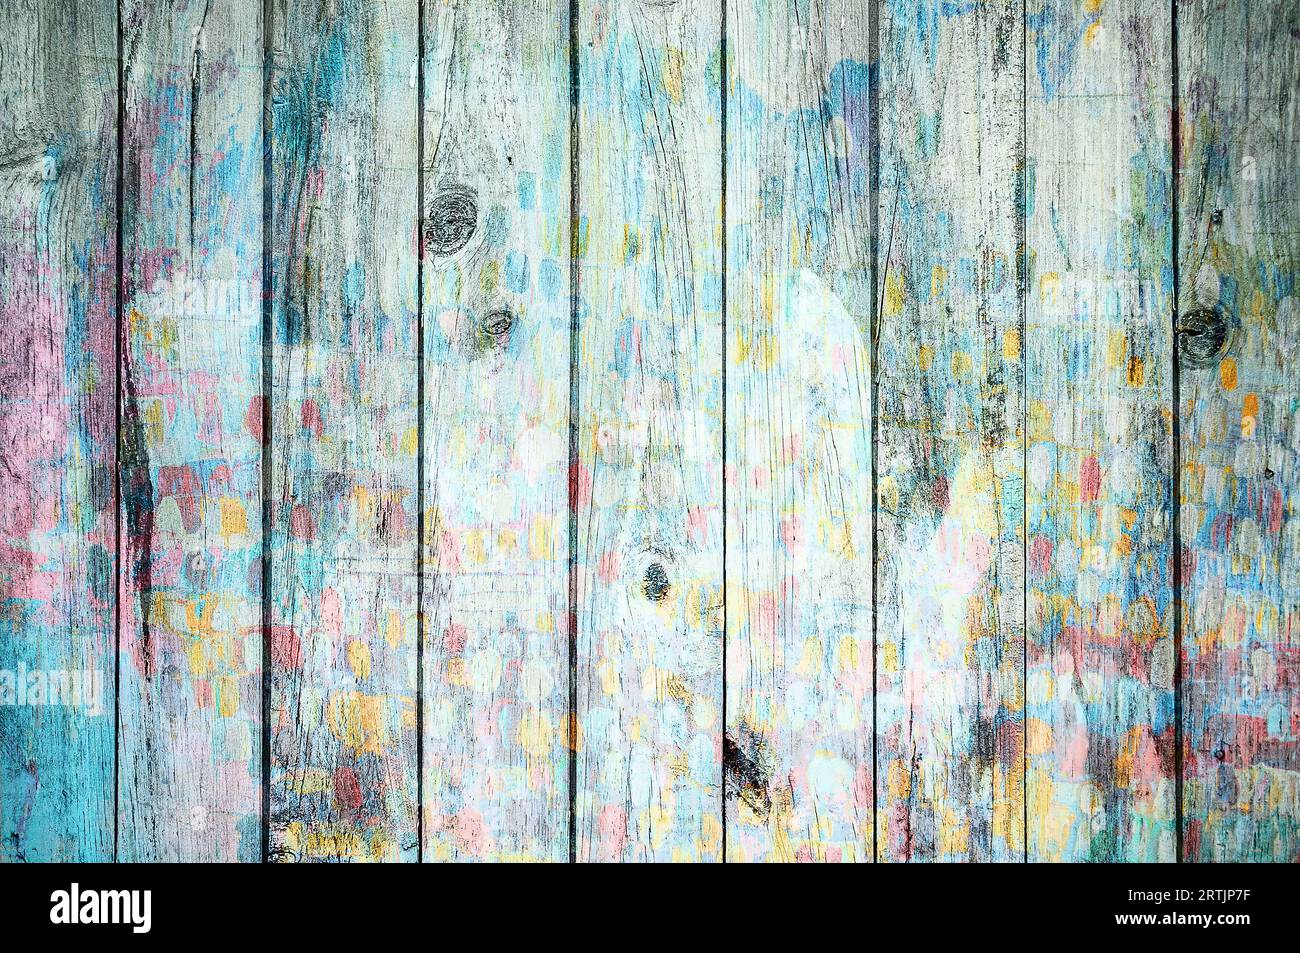 Old multicolour wooden background, perfect textured pattern. Stock Photo